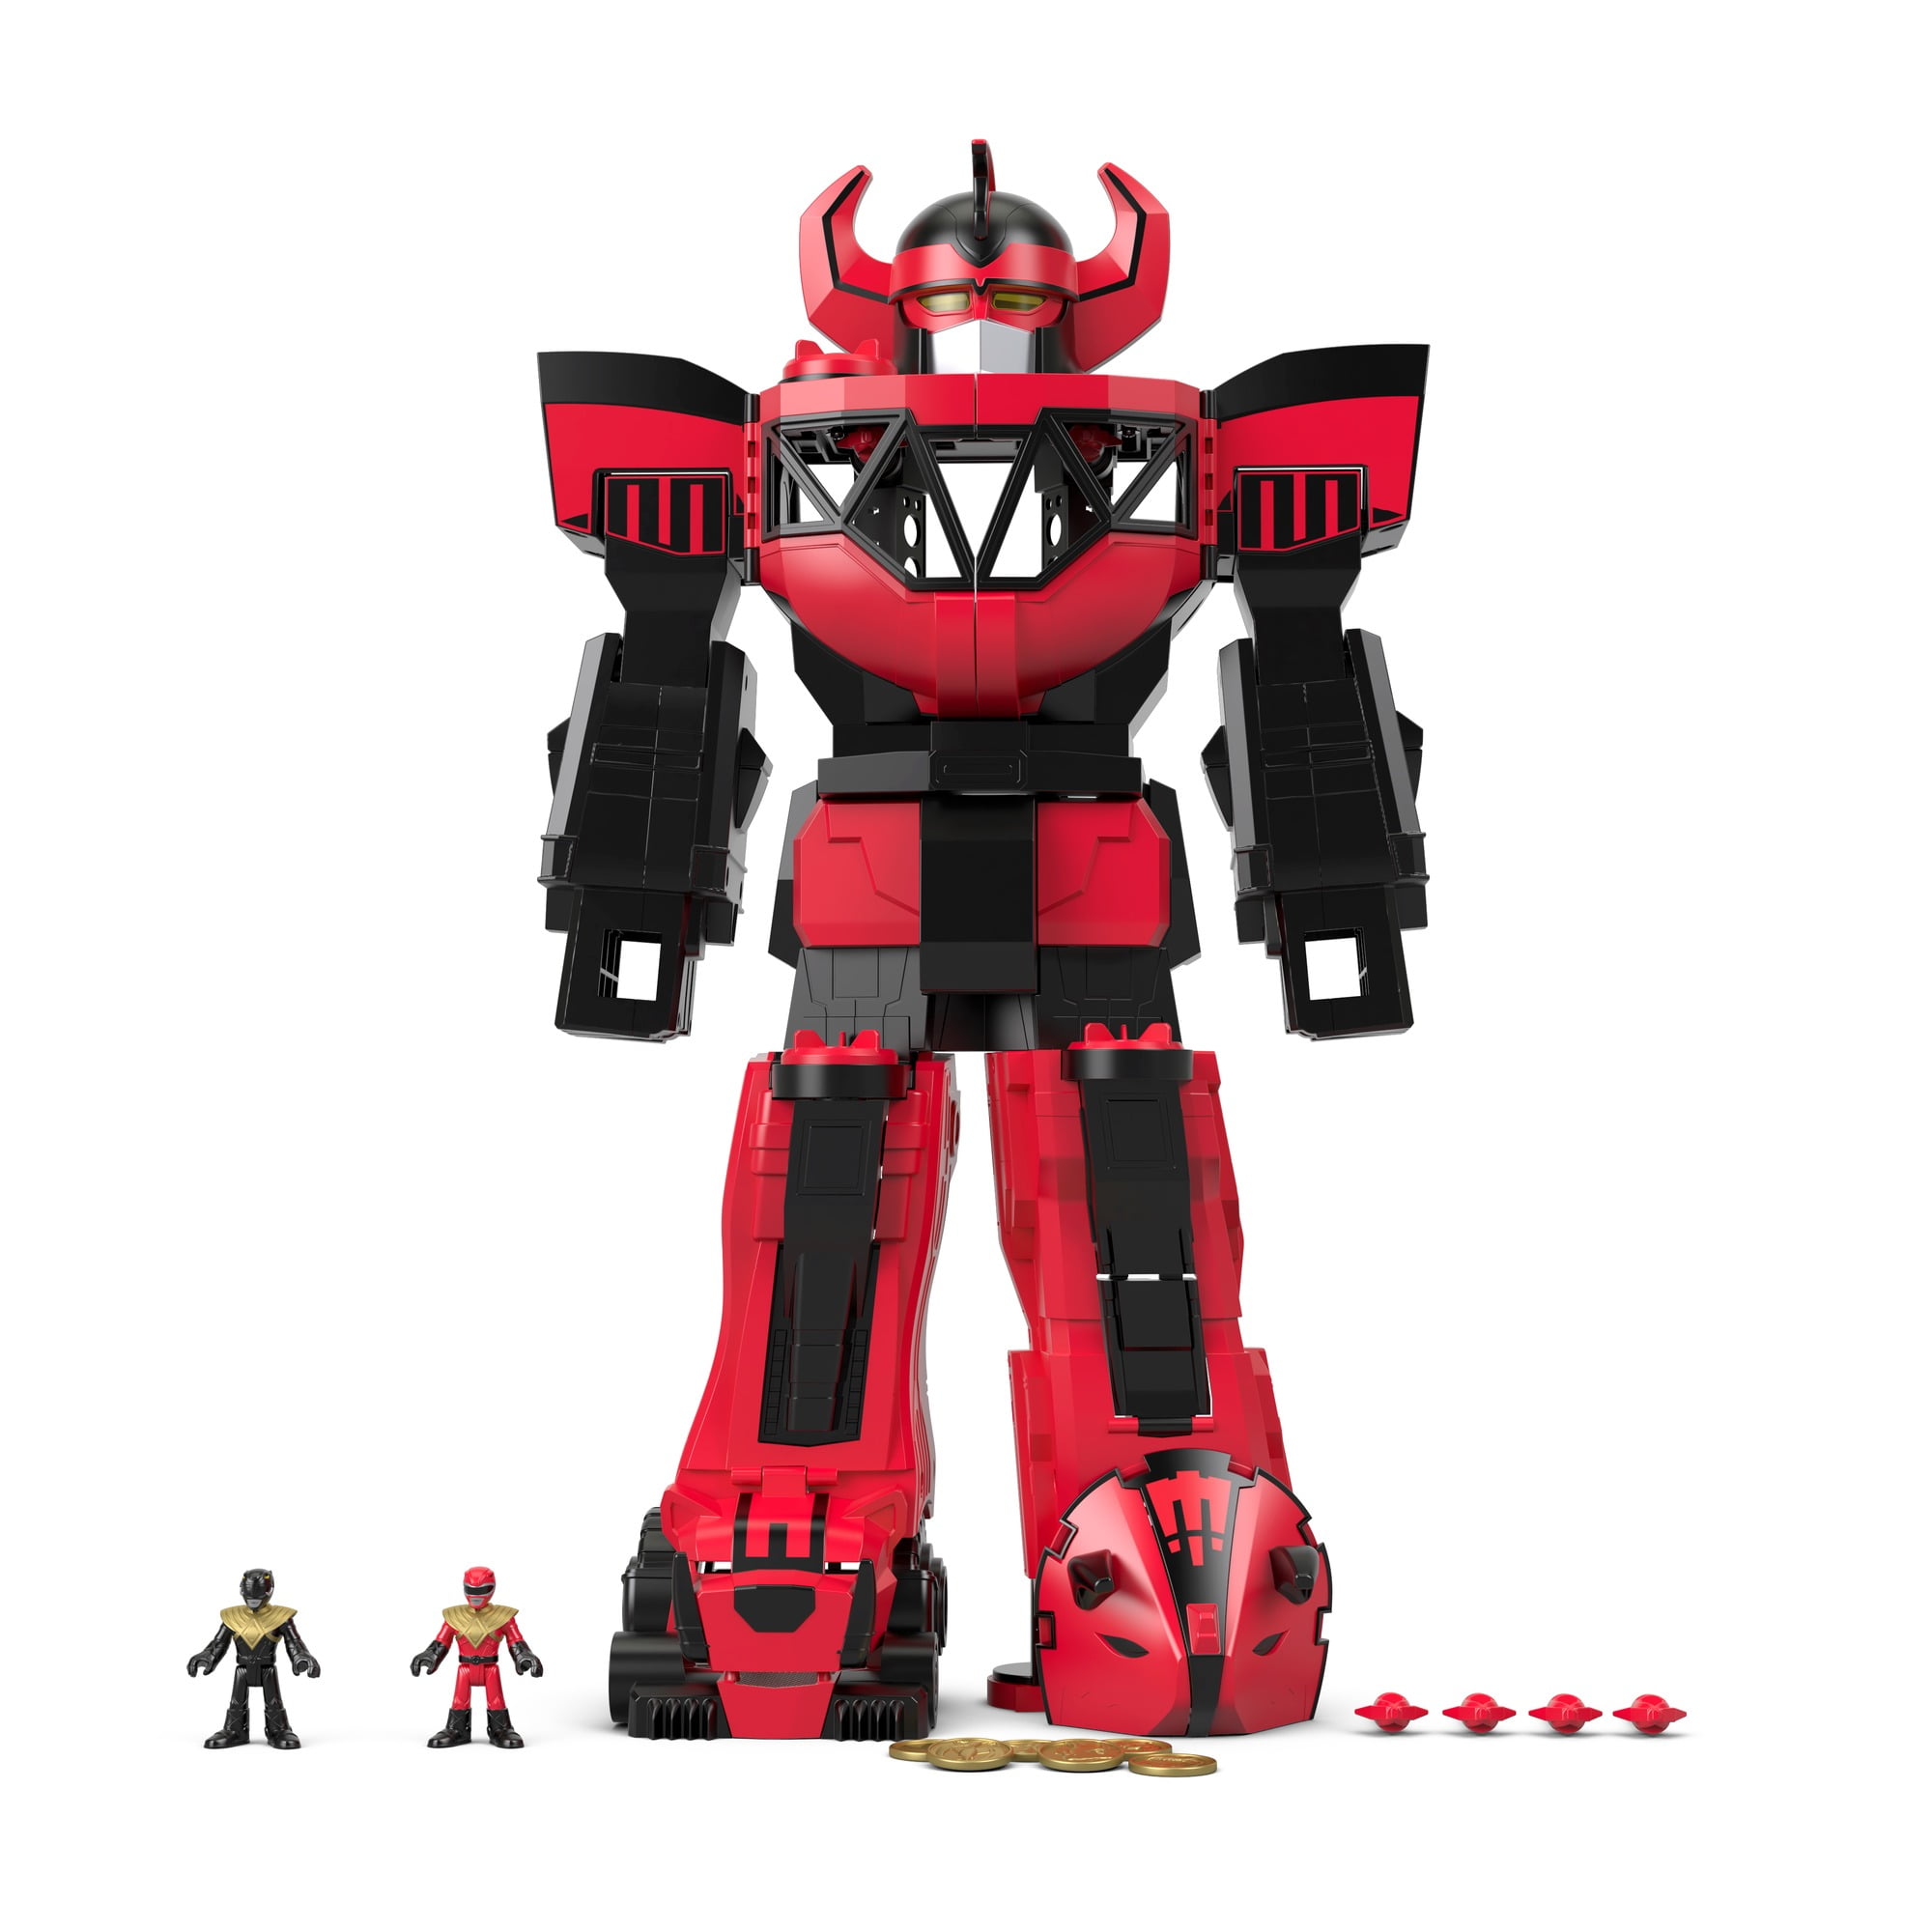 Fisher-Price Power Rangers Imaginext Megazord Red And Black Replacement Figures 